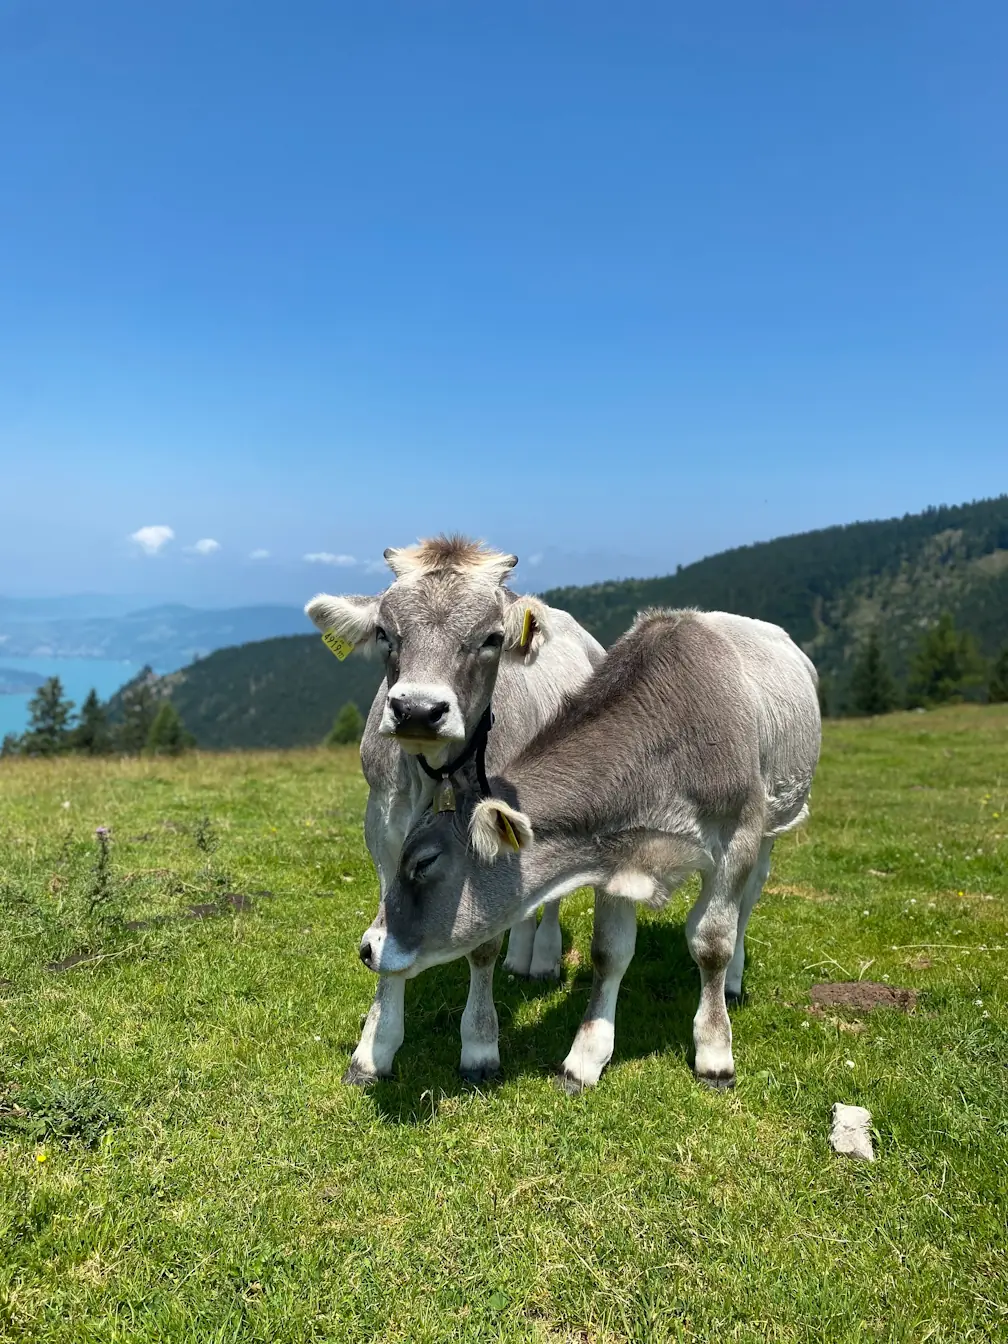 Two young, gray calves huddling together in a mountain meadow.